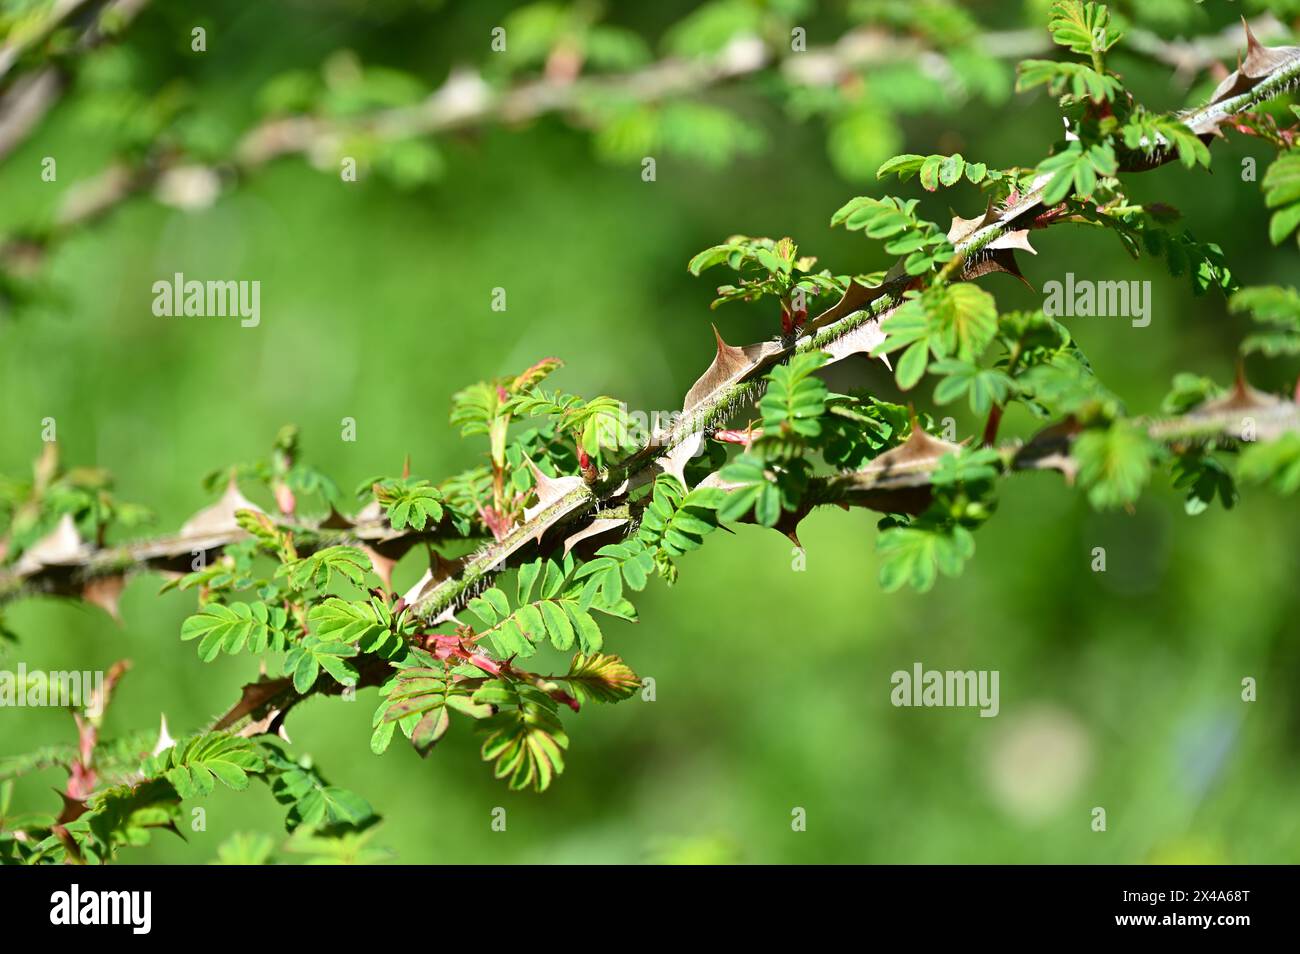 The large spikes or thorns and new spring growth on stems of wingthorn rose Rosa sericea omeiensis pteracantha in UK garden April Stock Photo